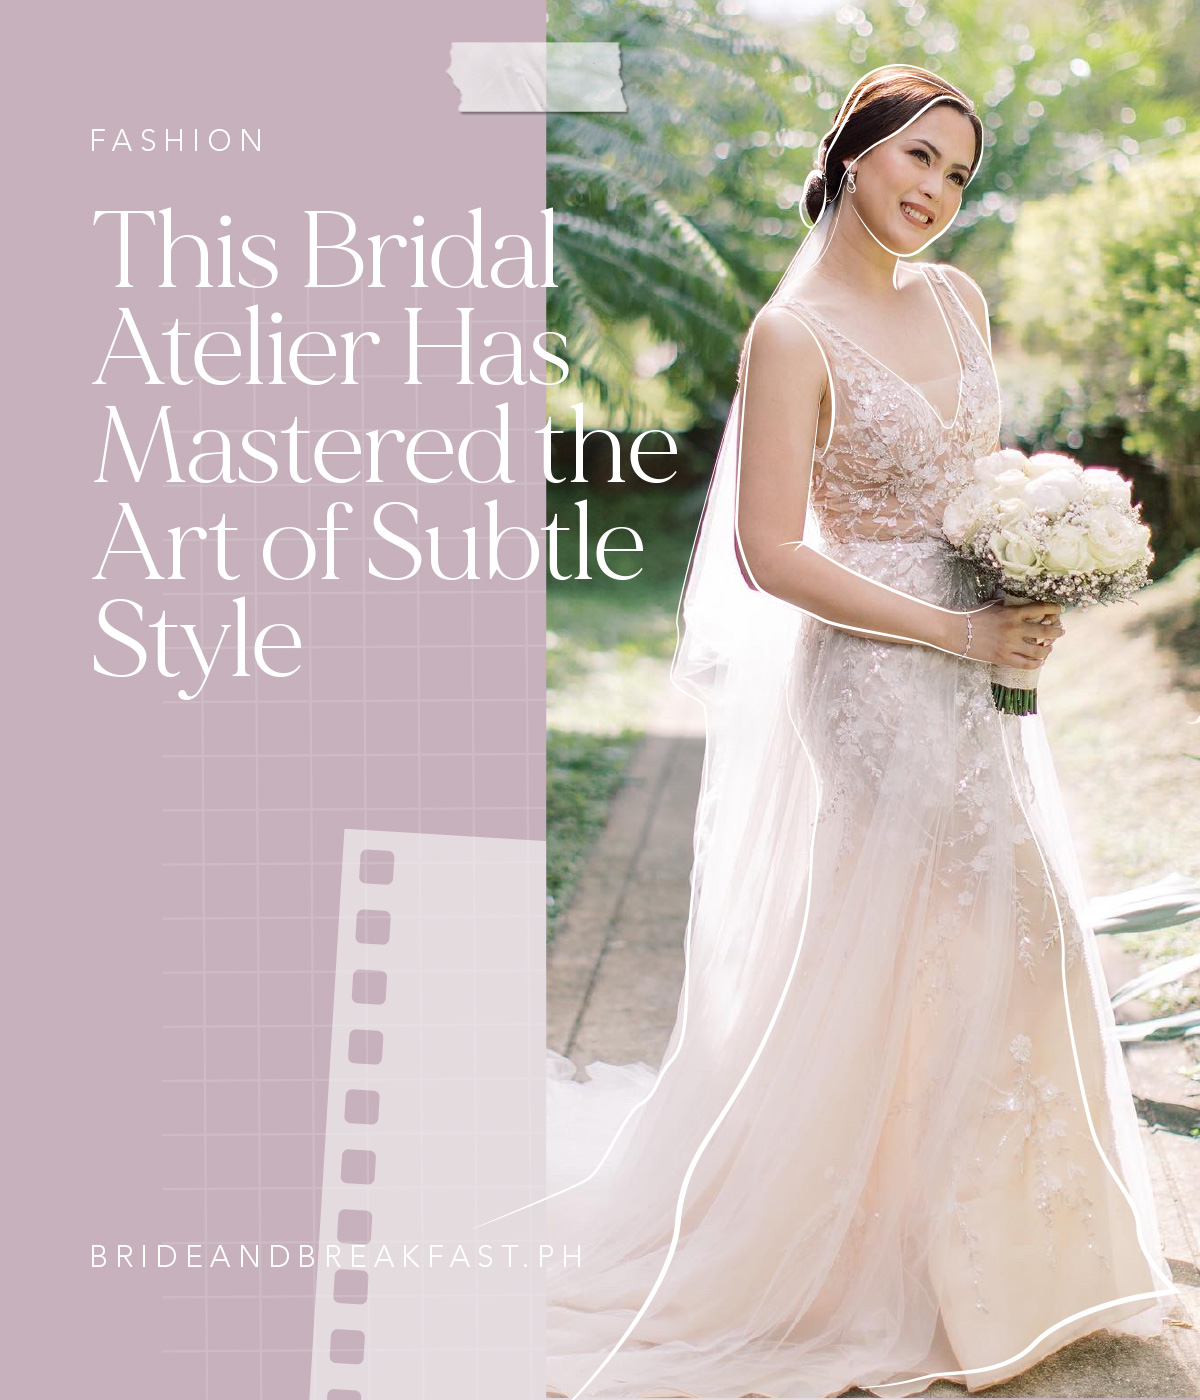 This Bridal Atelier Has Mastered the Art of Subtle Style